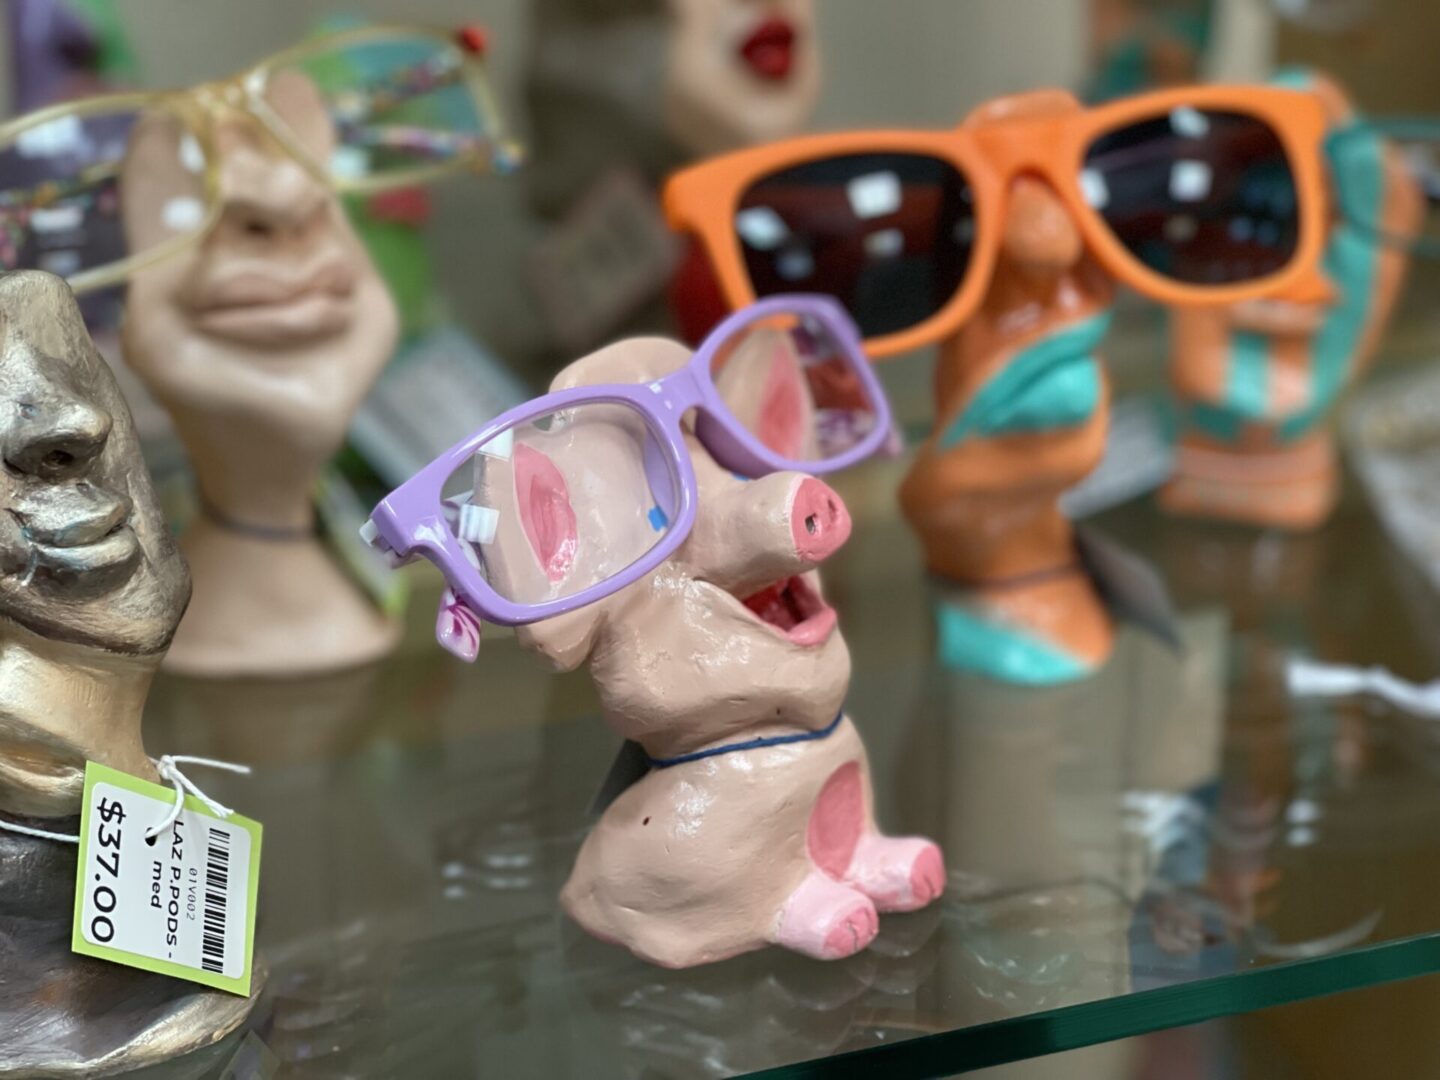 A display of figurines with sunglasses on display.